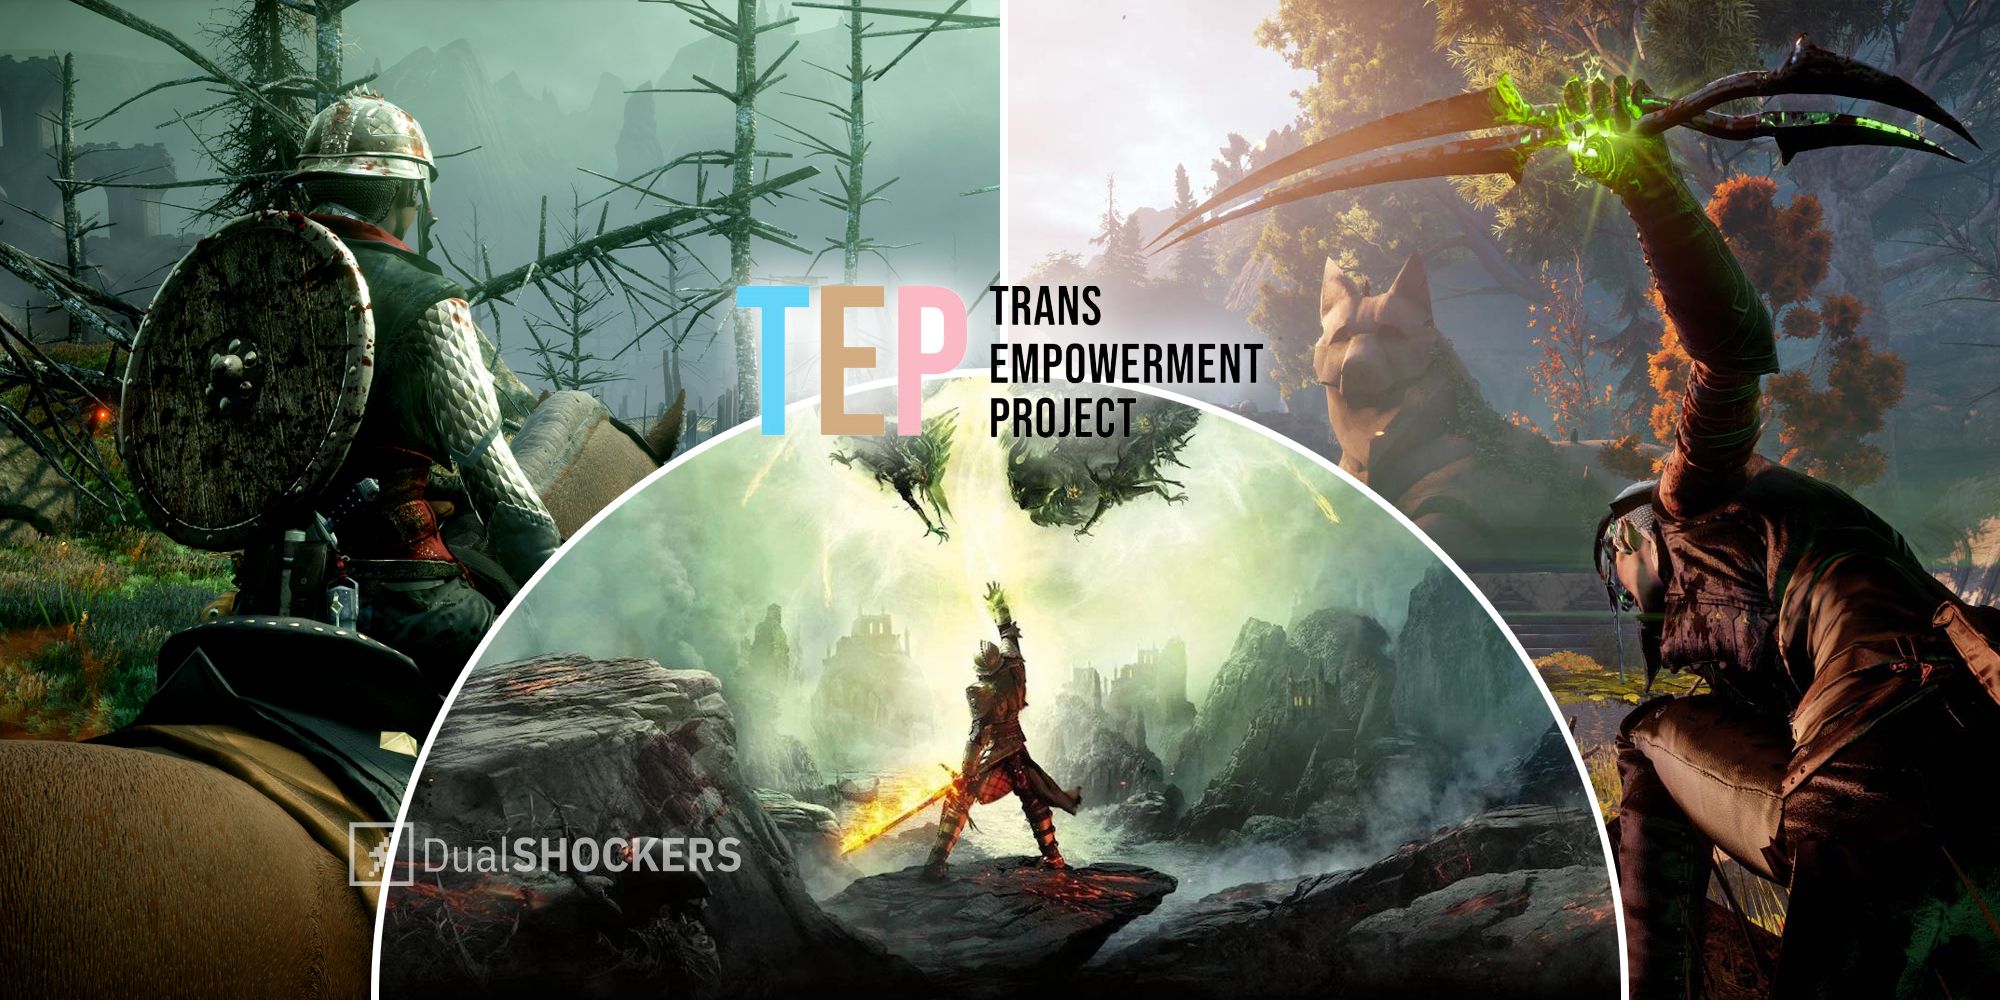 Dragon Age Inquisition and the Trans Empowerment Project